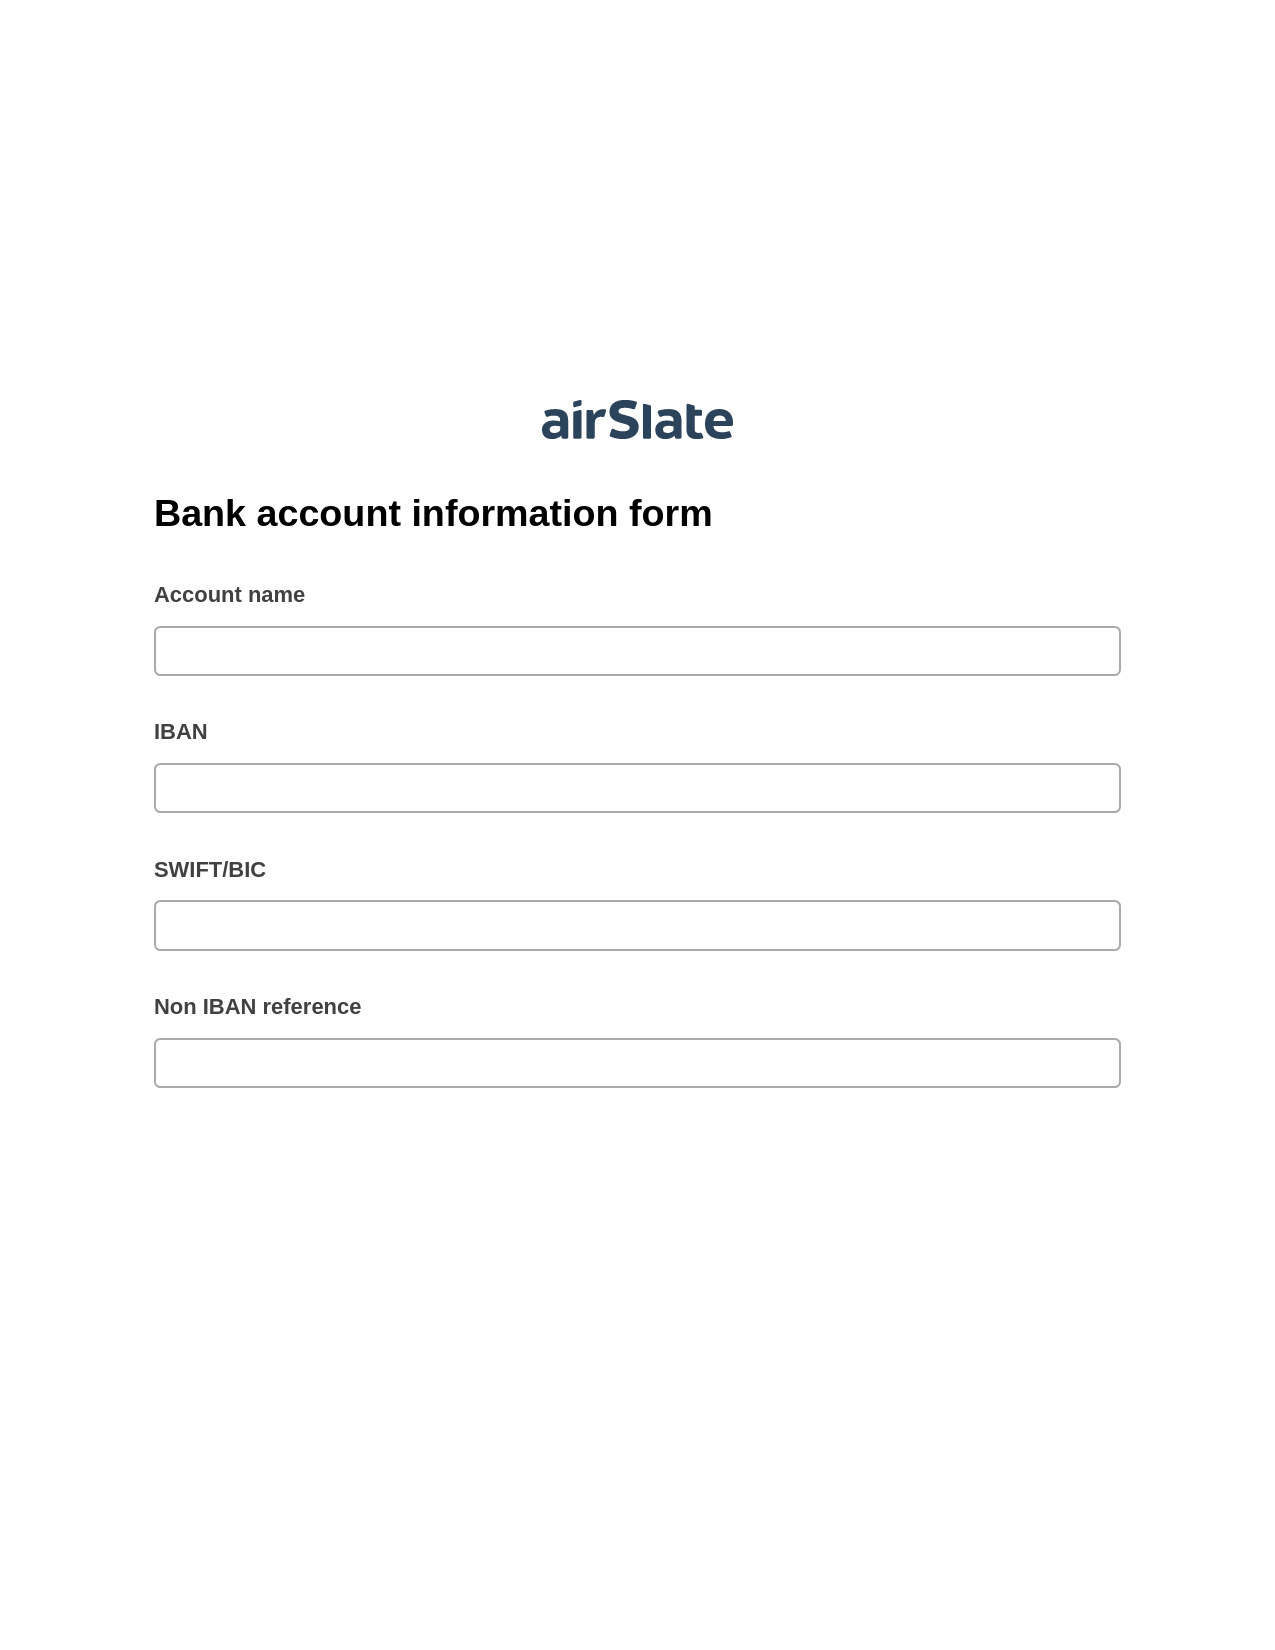 Bank account information form Pre-fill from MySQL Dropdown Options Bot, Add Tags to Slate Bot, Export to Google Sheet Bot